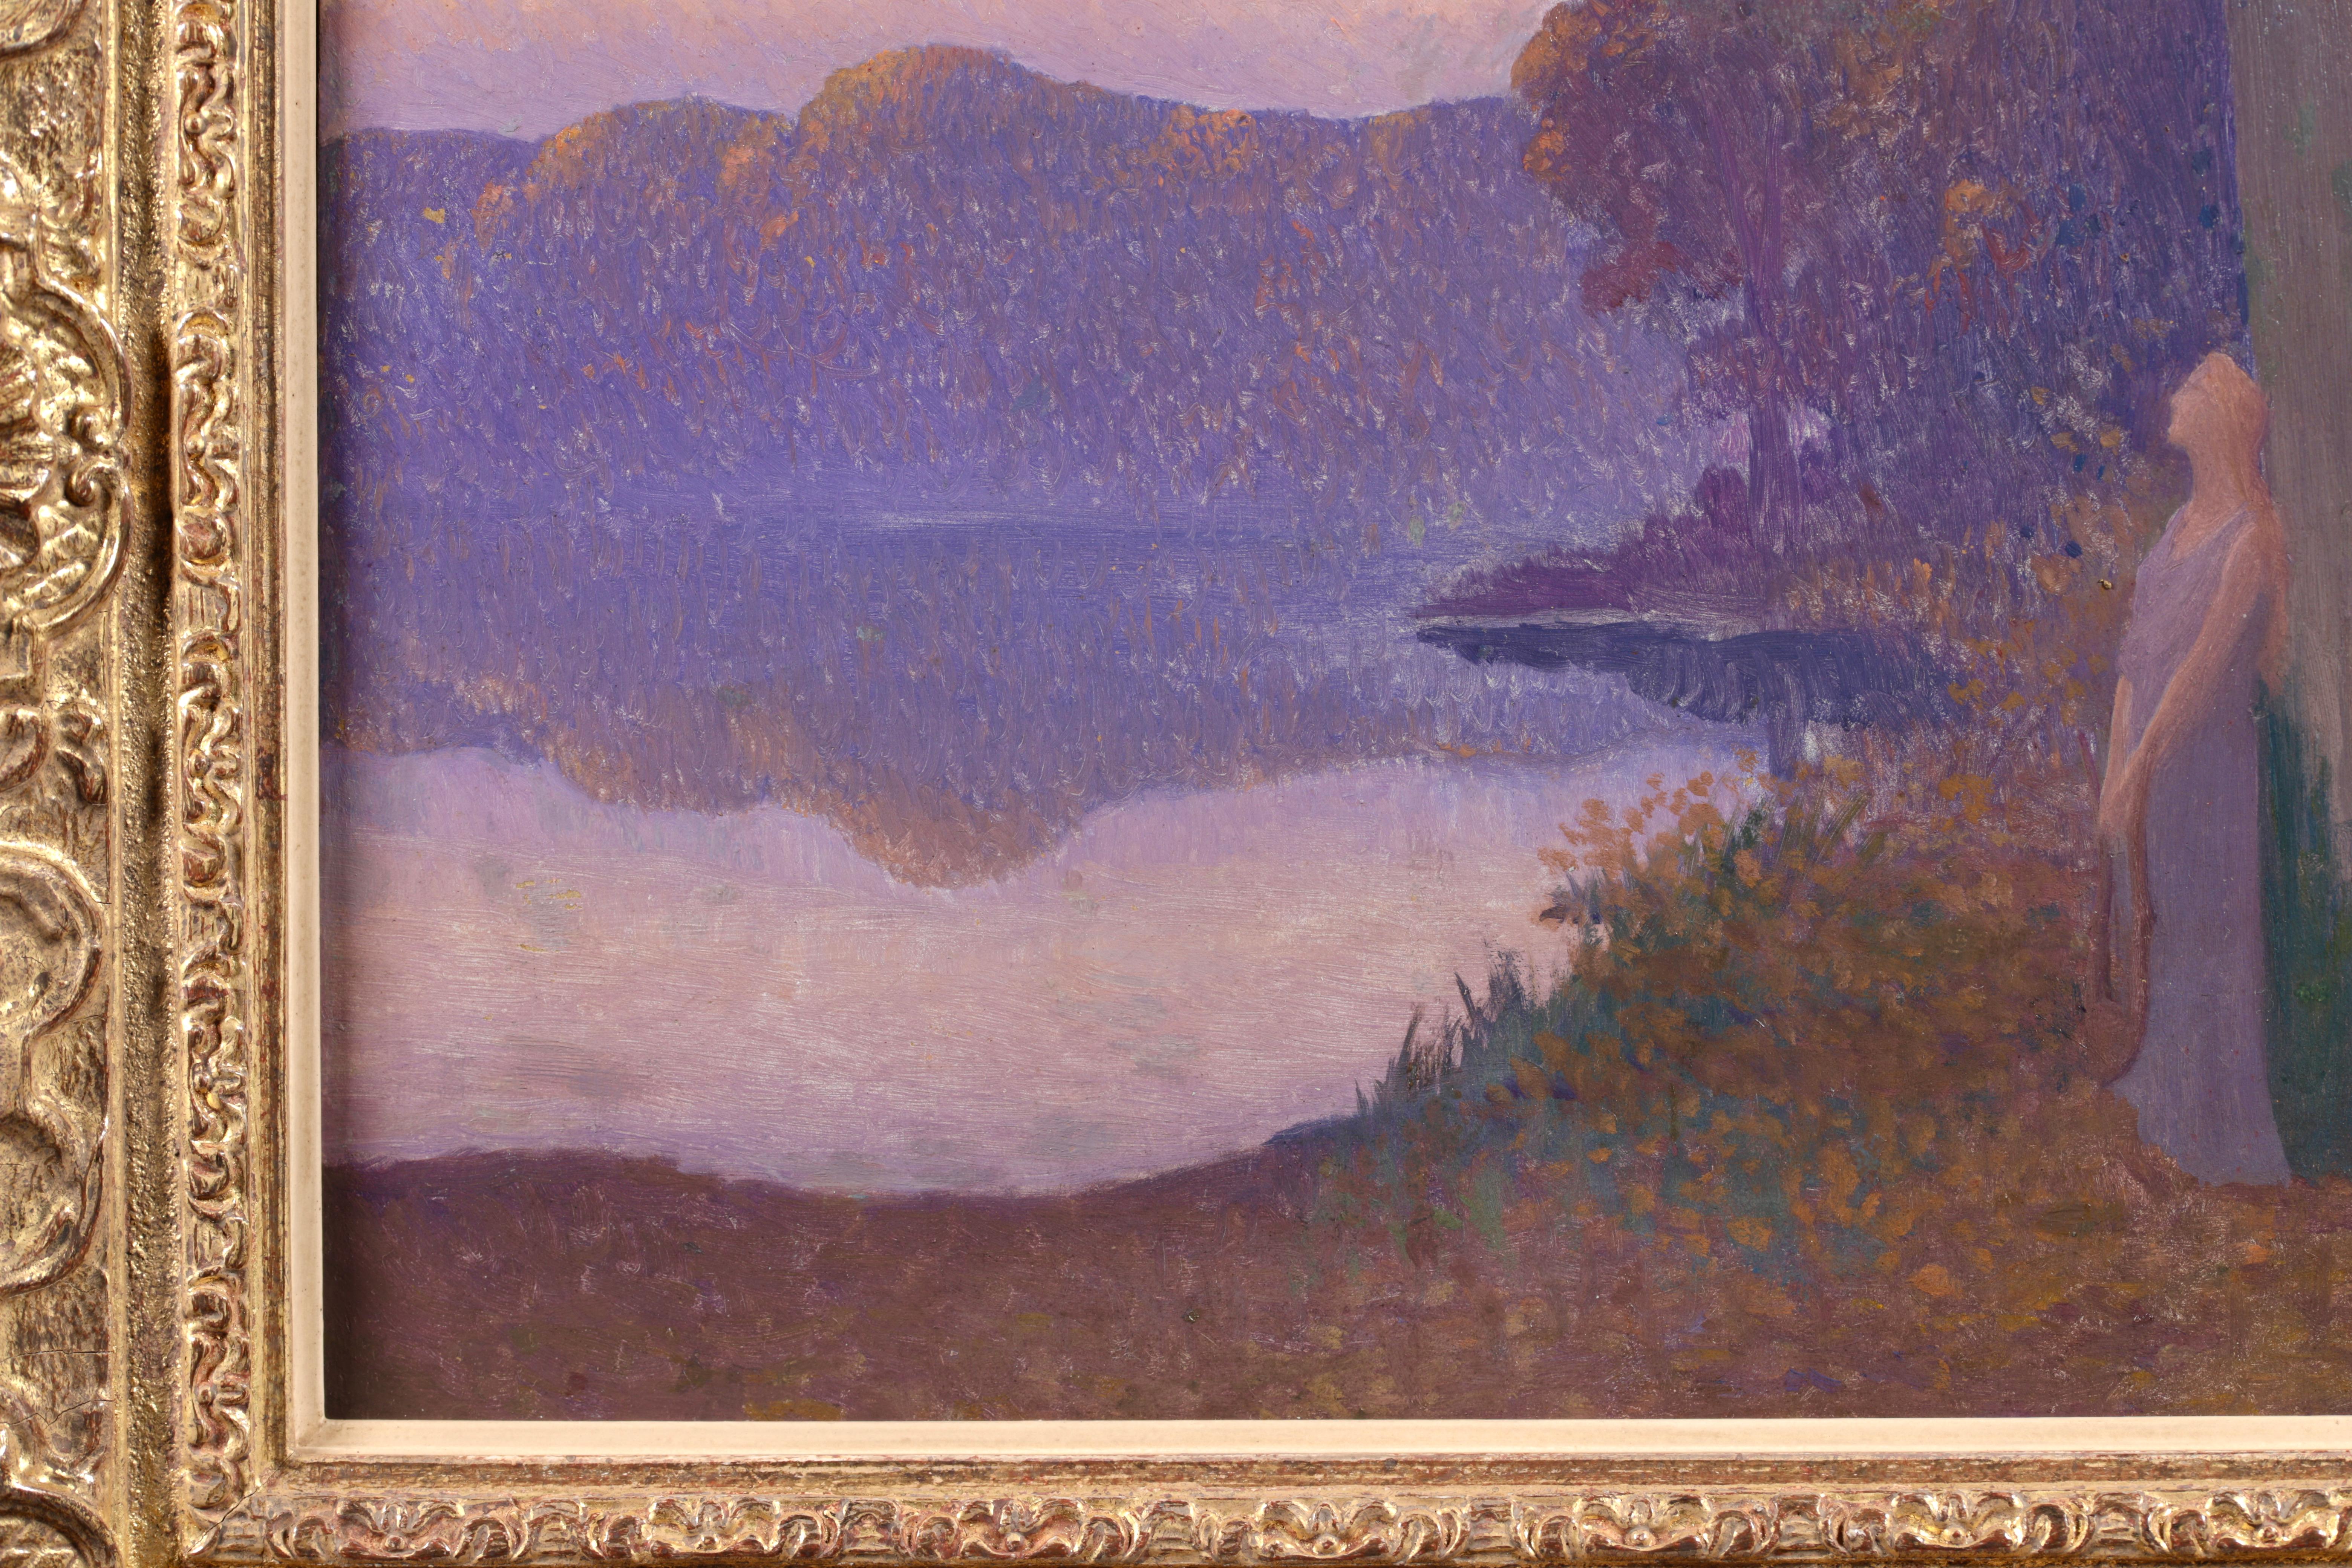 Signed and dated symbolist figure in landscape oil on board by French painter Alphonse Osbert. The piece depicts a blonde woman in a full length purple dress holding a leather satchel and leaning against the moss-covered trunk of a tree. She is